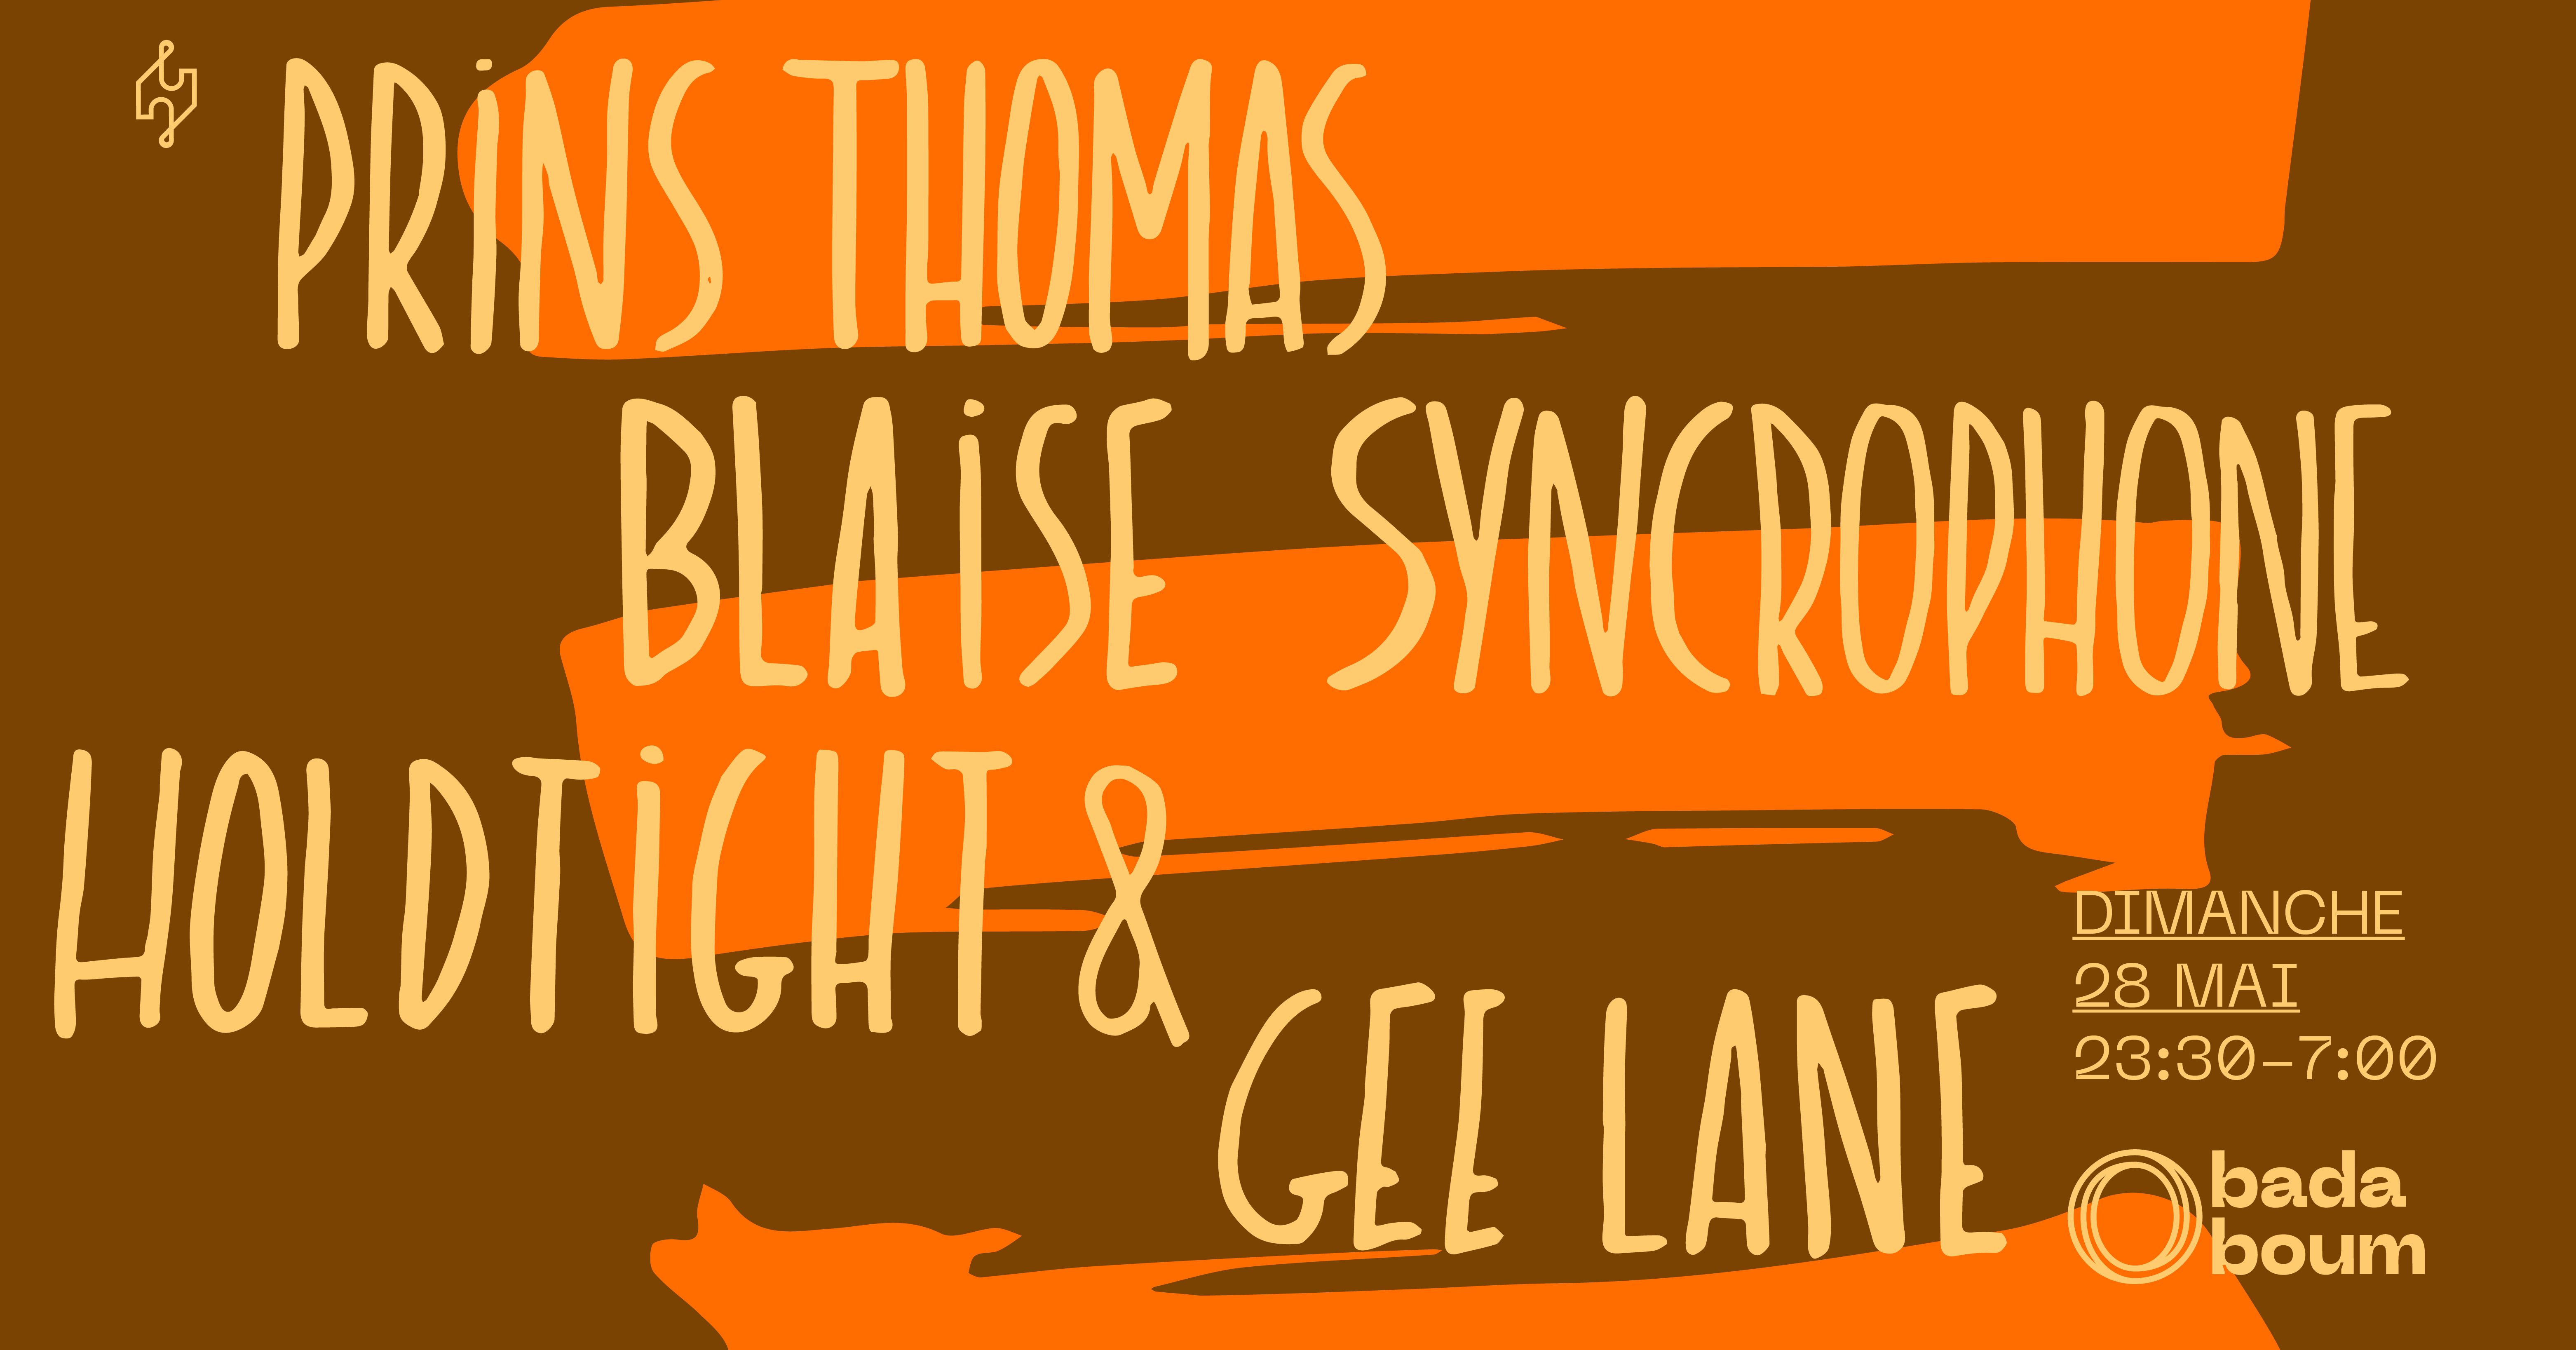 Club - Syncrophone label night with Prins Thomas, HOLDTight - Página frontal